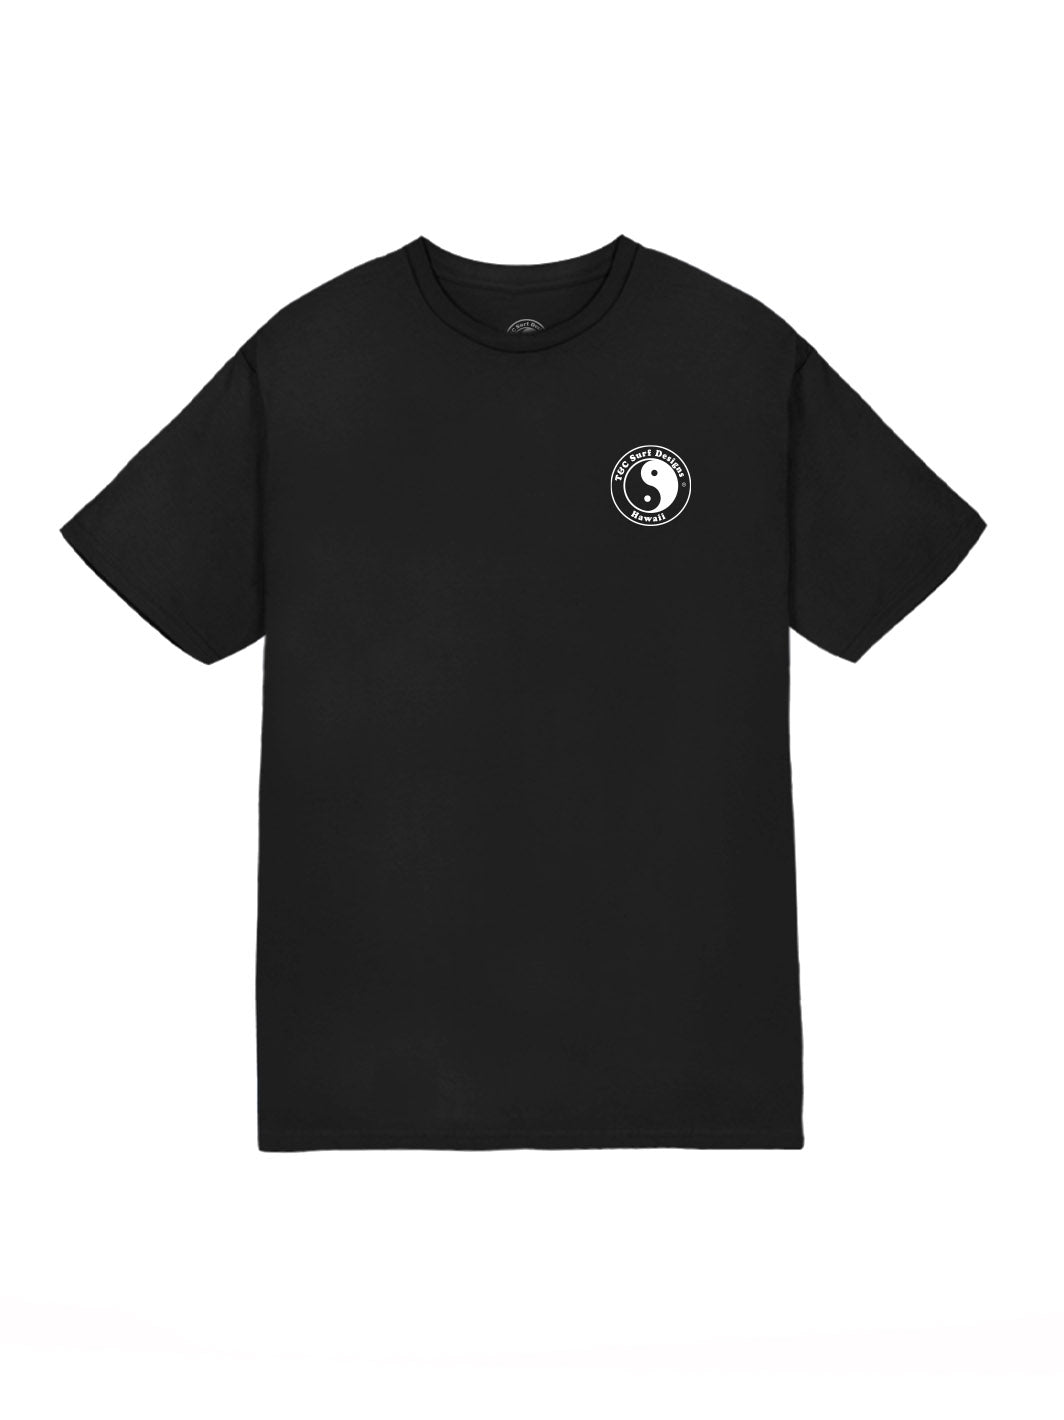 T&C Surf Designs T&C Surf All Swell Jersey Tee, 